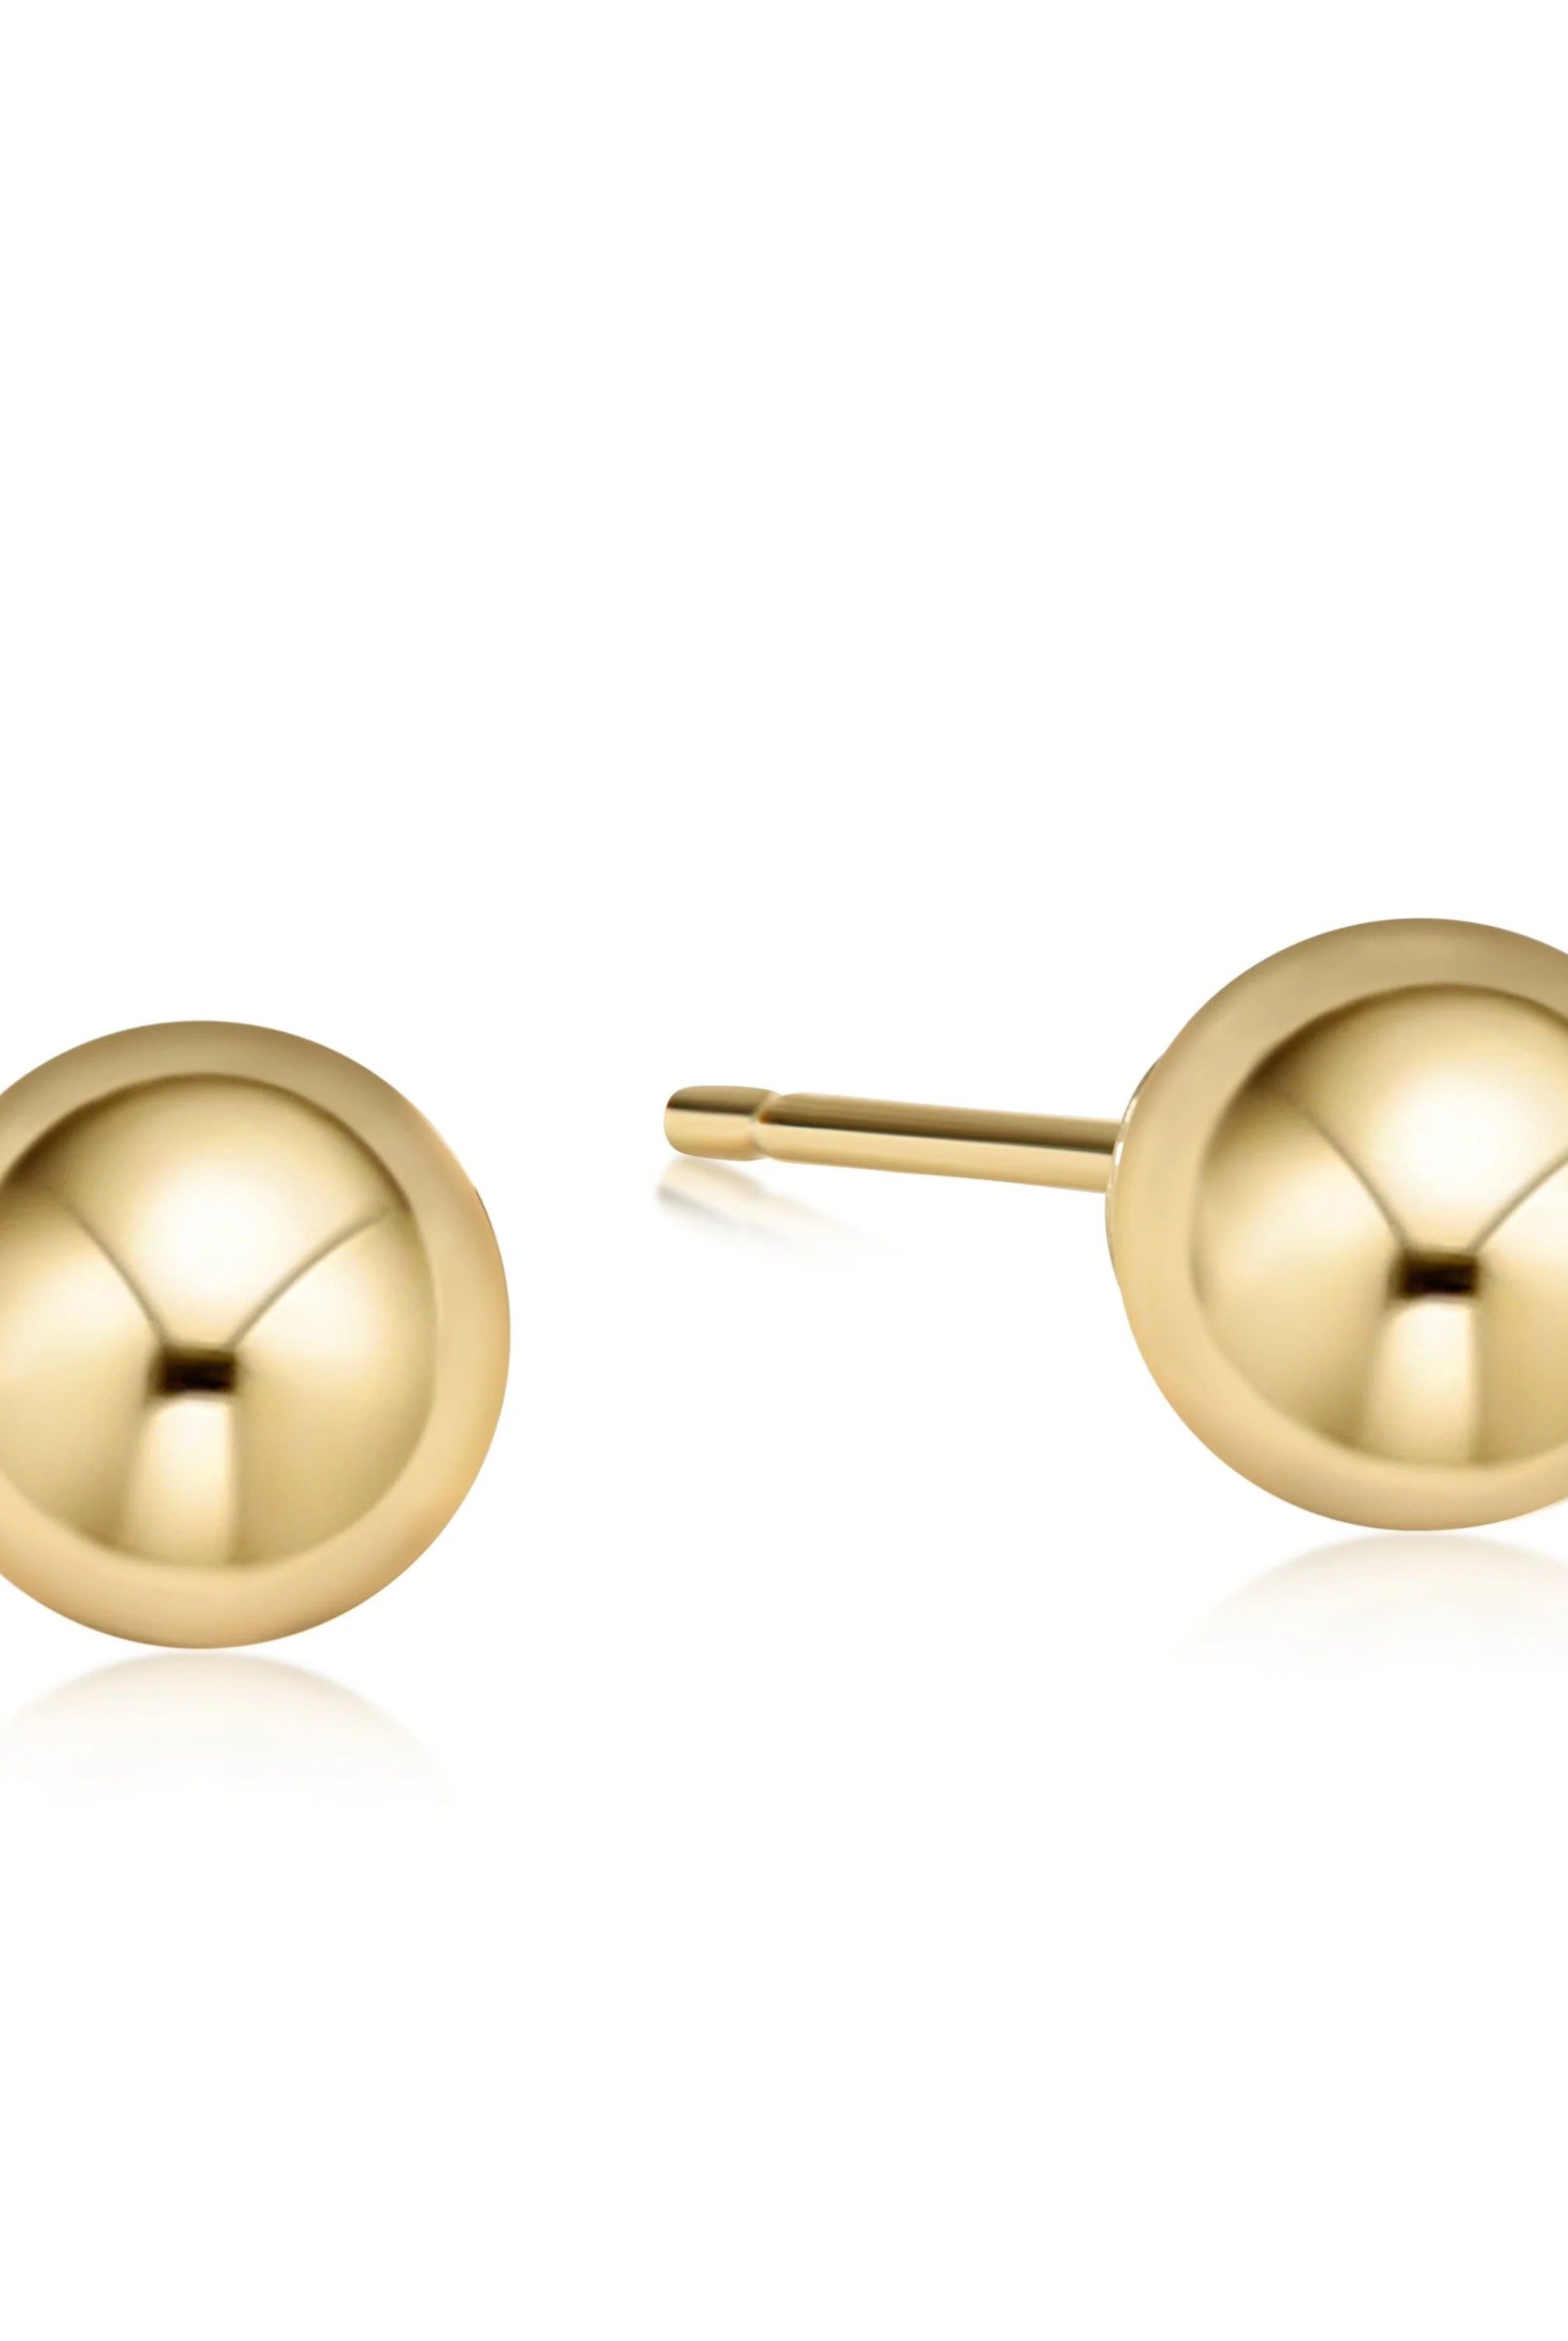 10mm Gold Stud-Earrings-eNewton-The Lovely Closet, Women's Fashion Boutique in Alexandria, KY